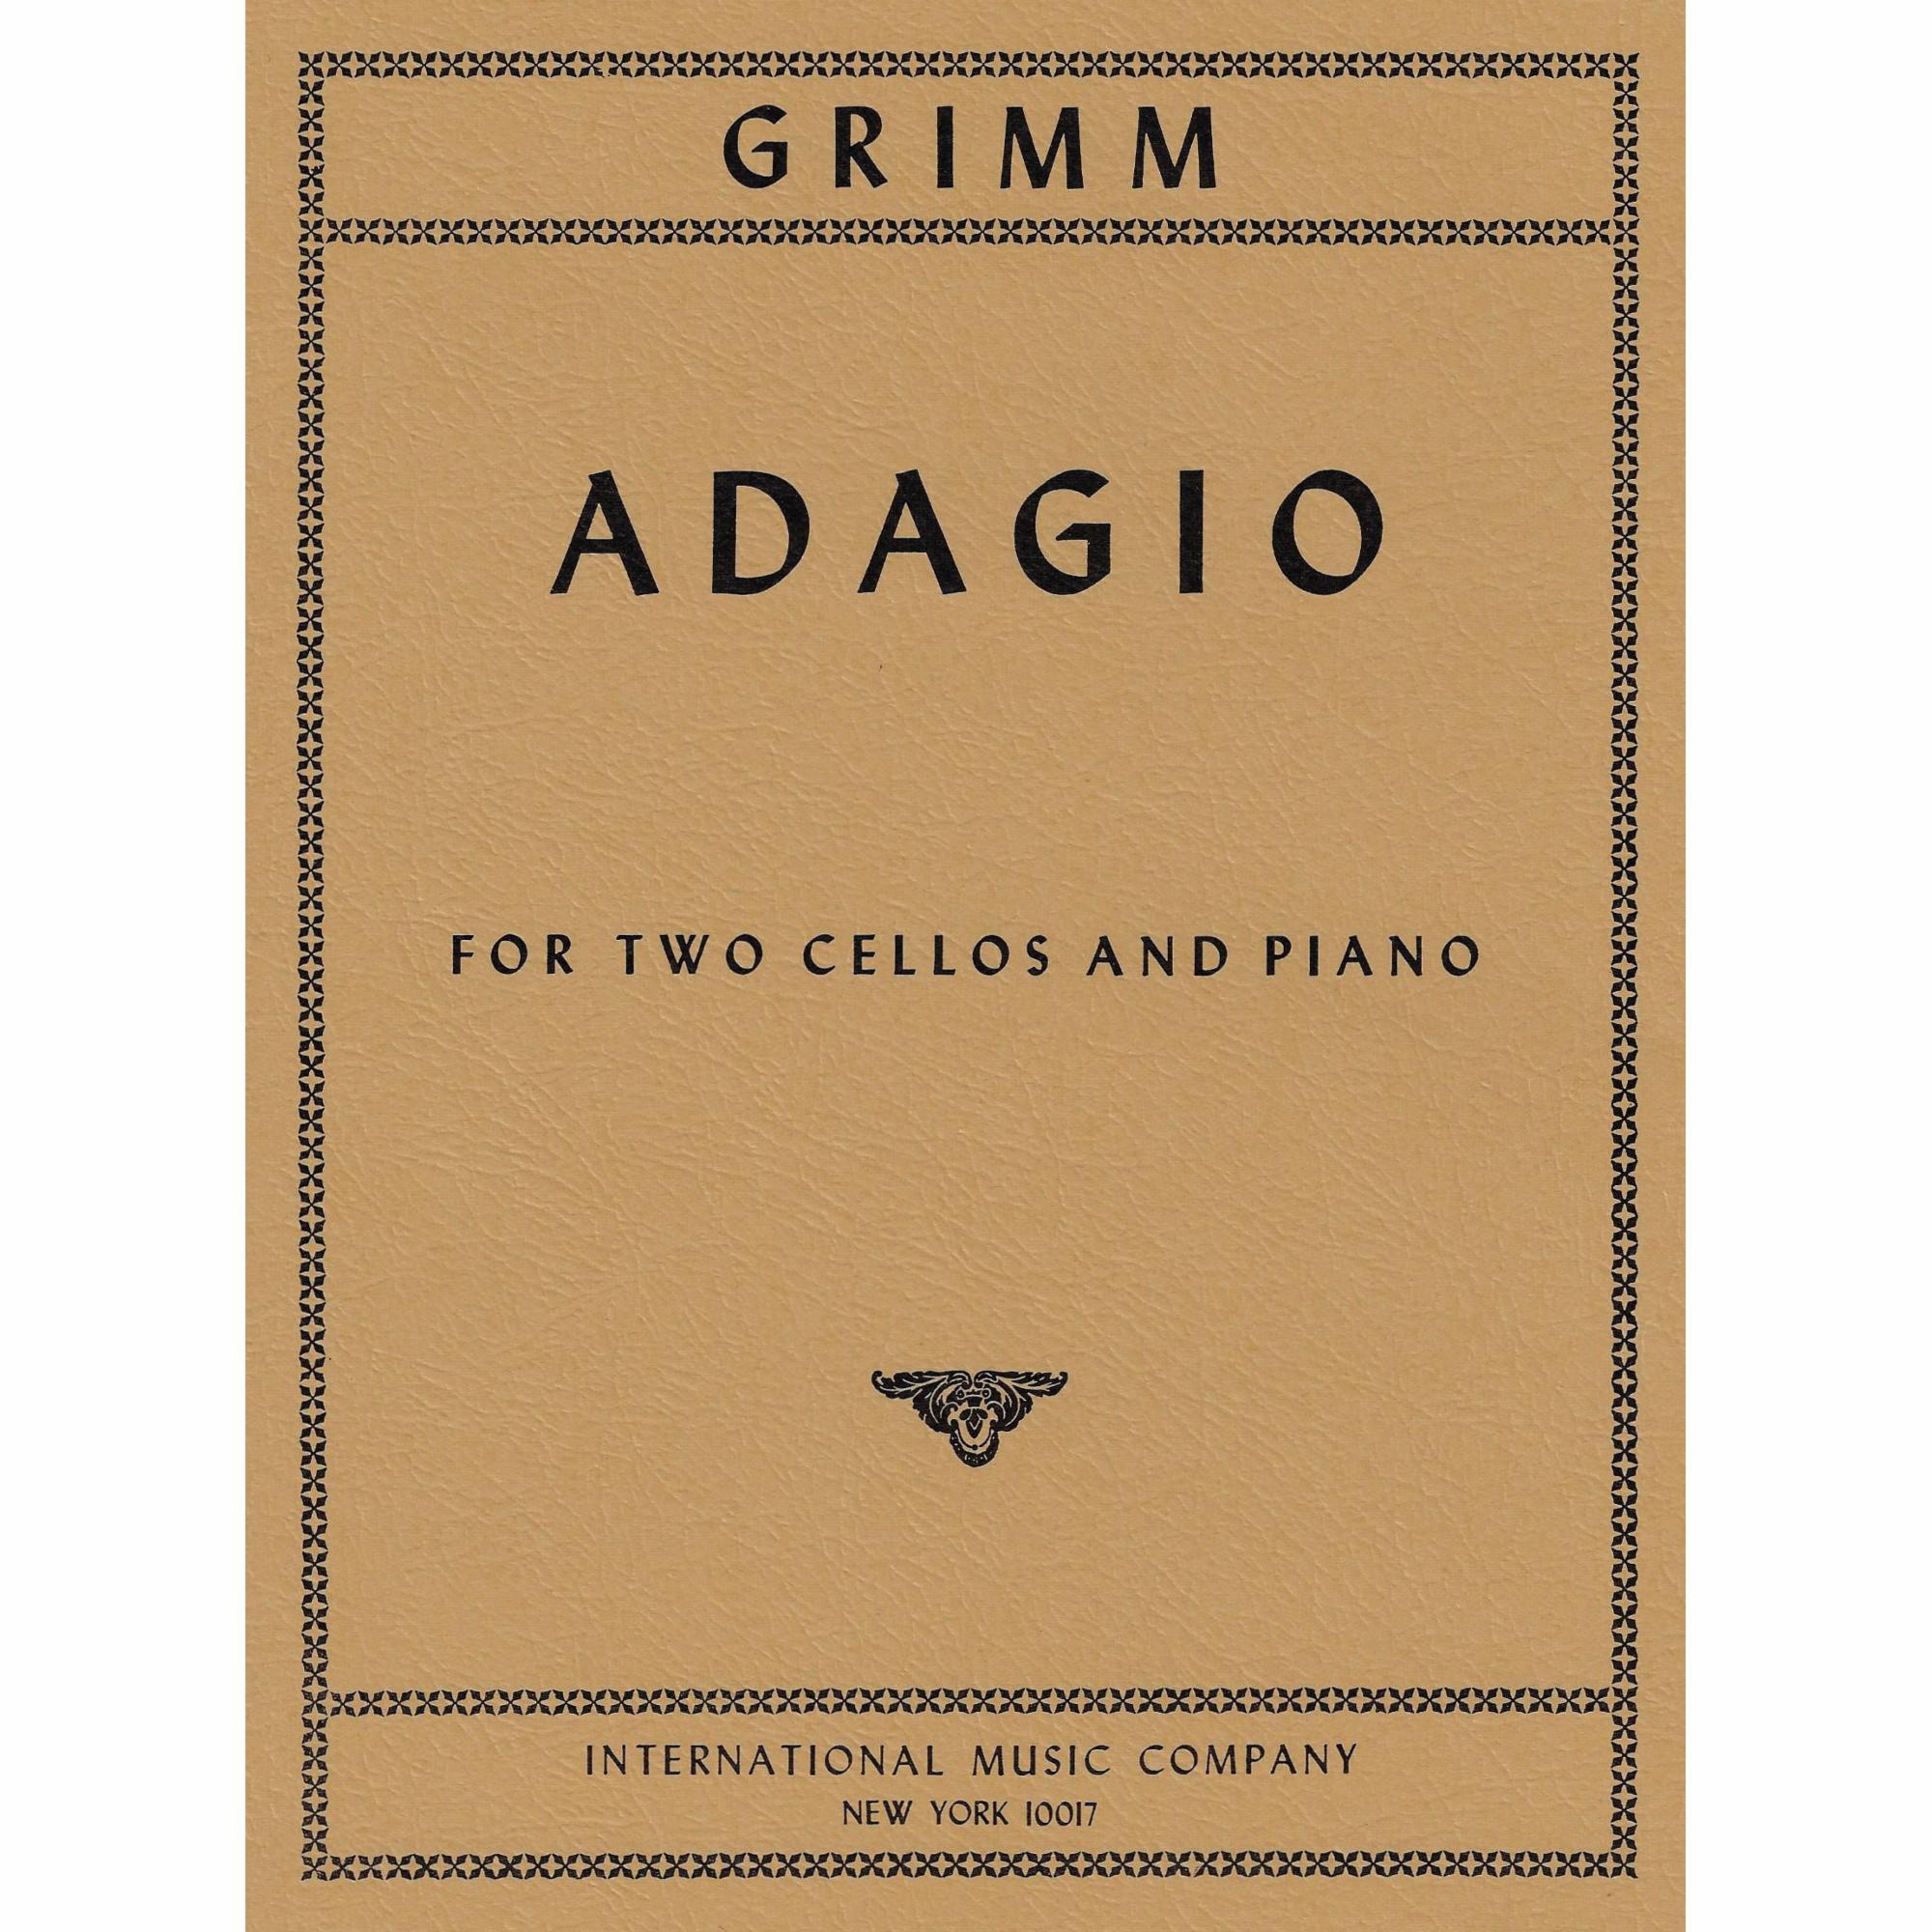 Grimm -- Adagio for Two Cellos and Piano